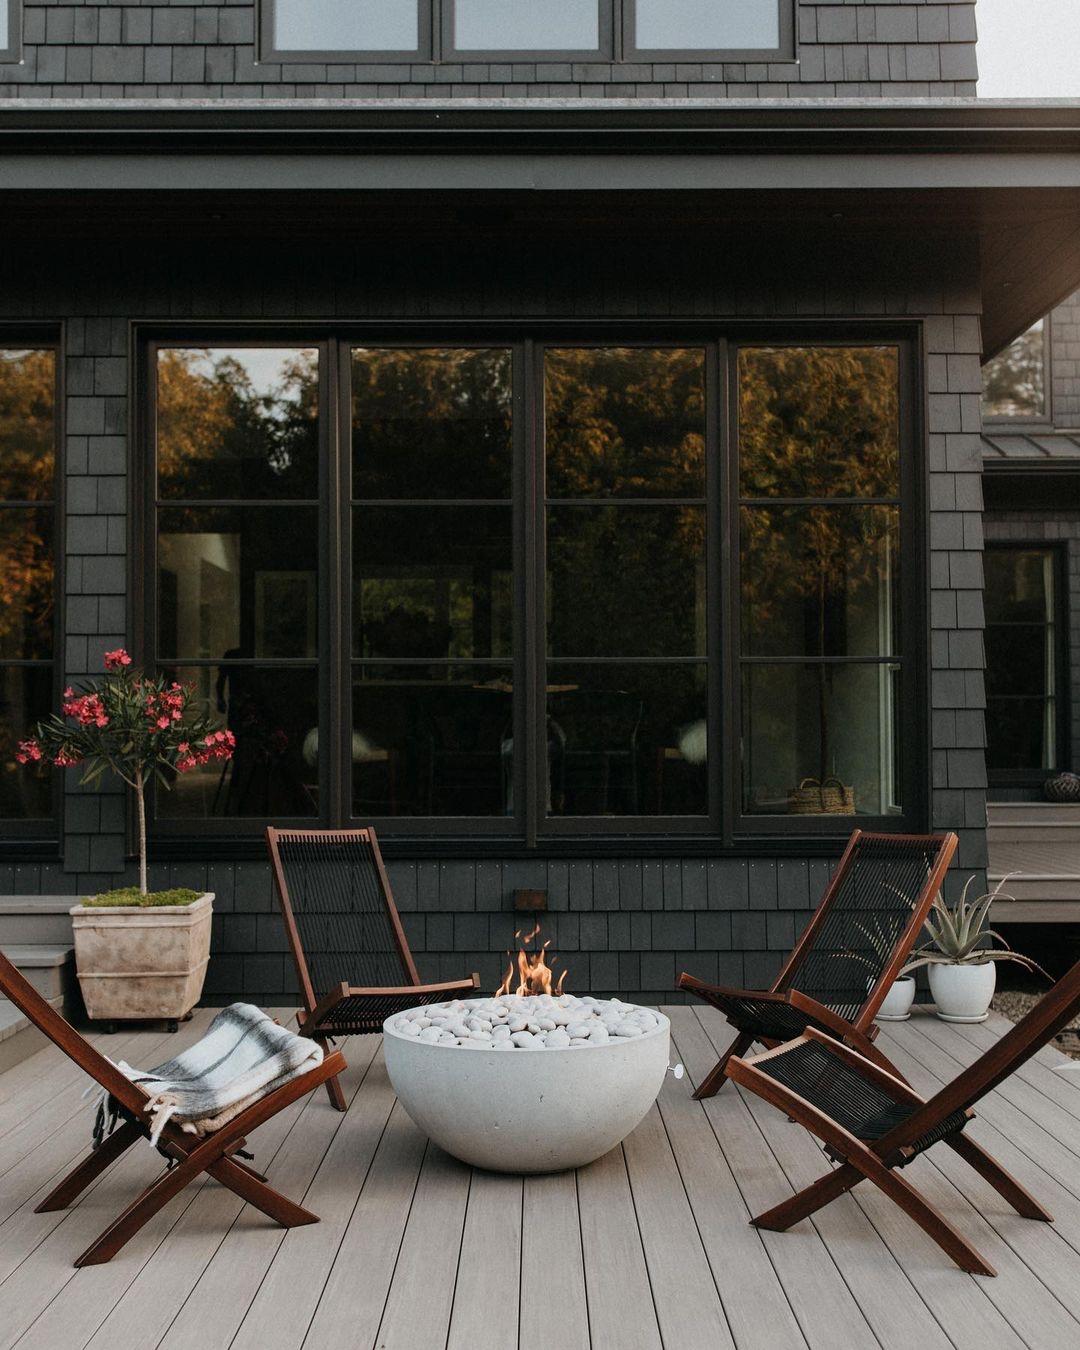 Four chairs are surrounding a bowl-shaped fire pit that is located on a back porch.